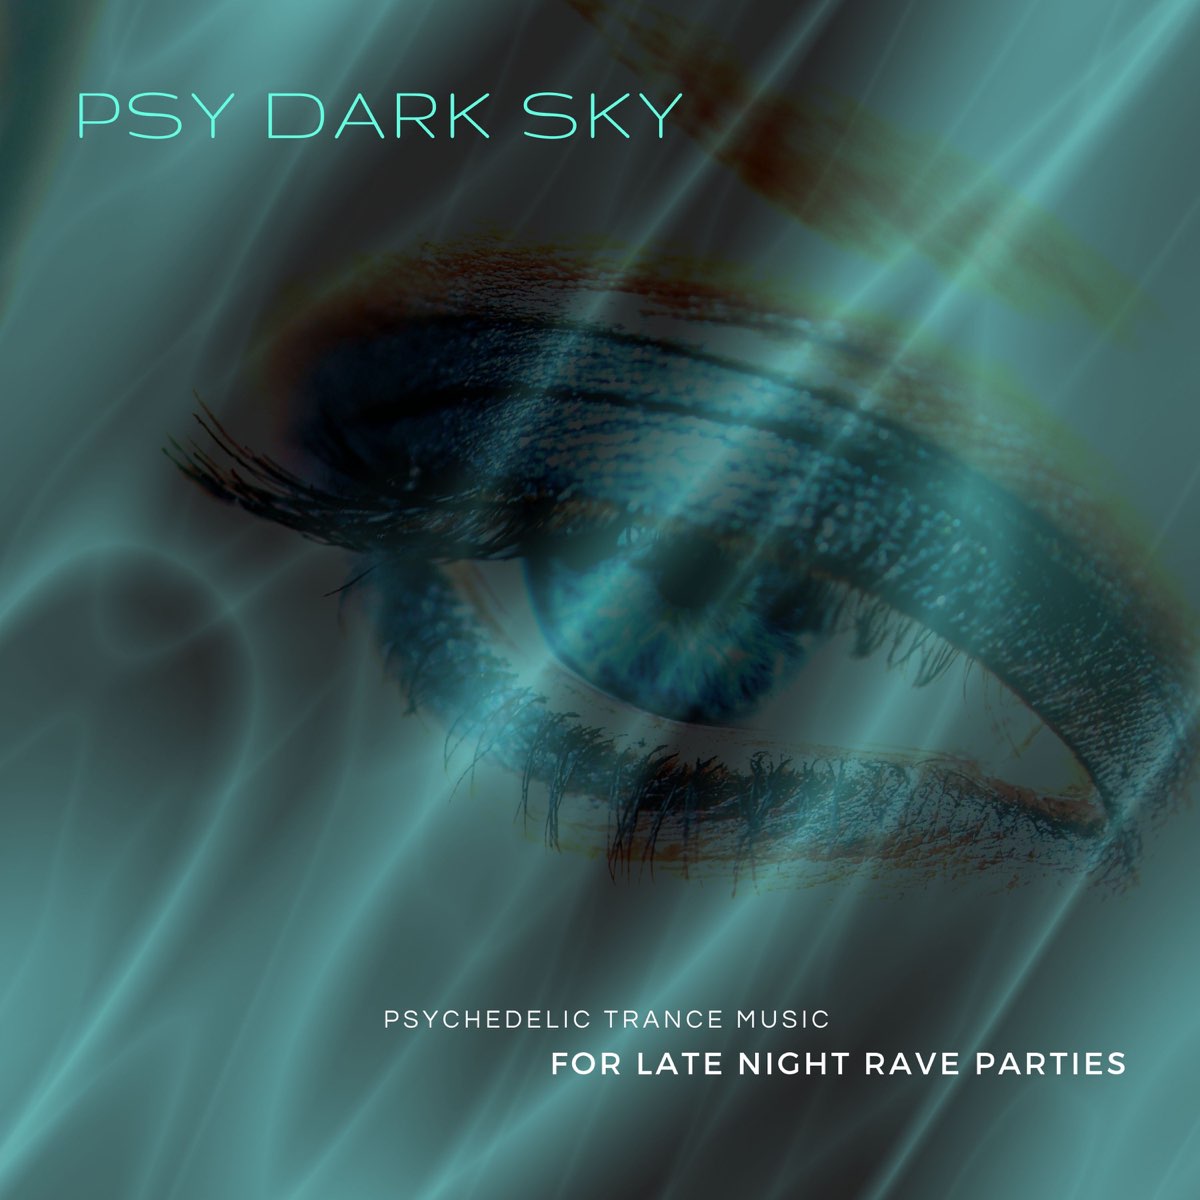 Psy Dark Sky - Trance Music for Late Night Rave Parties Artists on Music